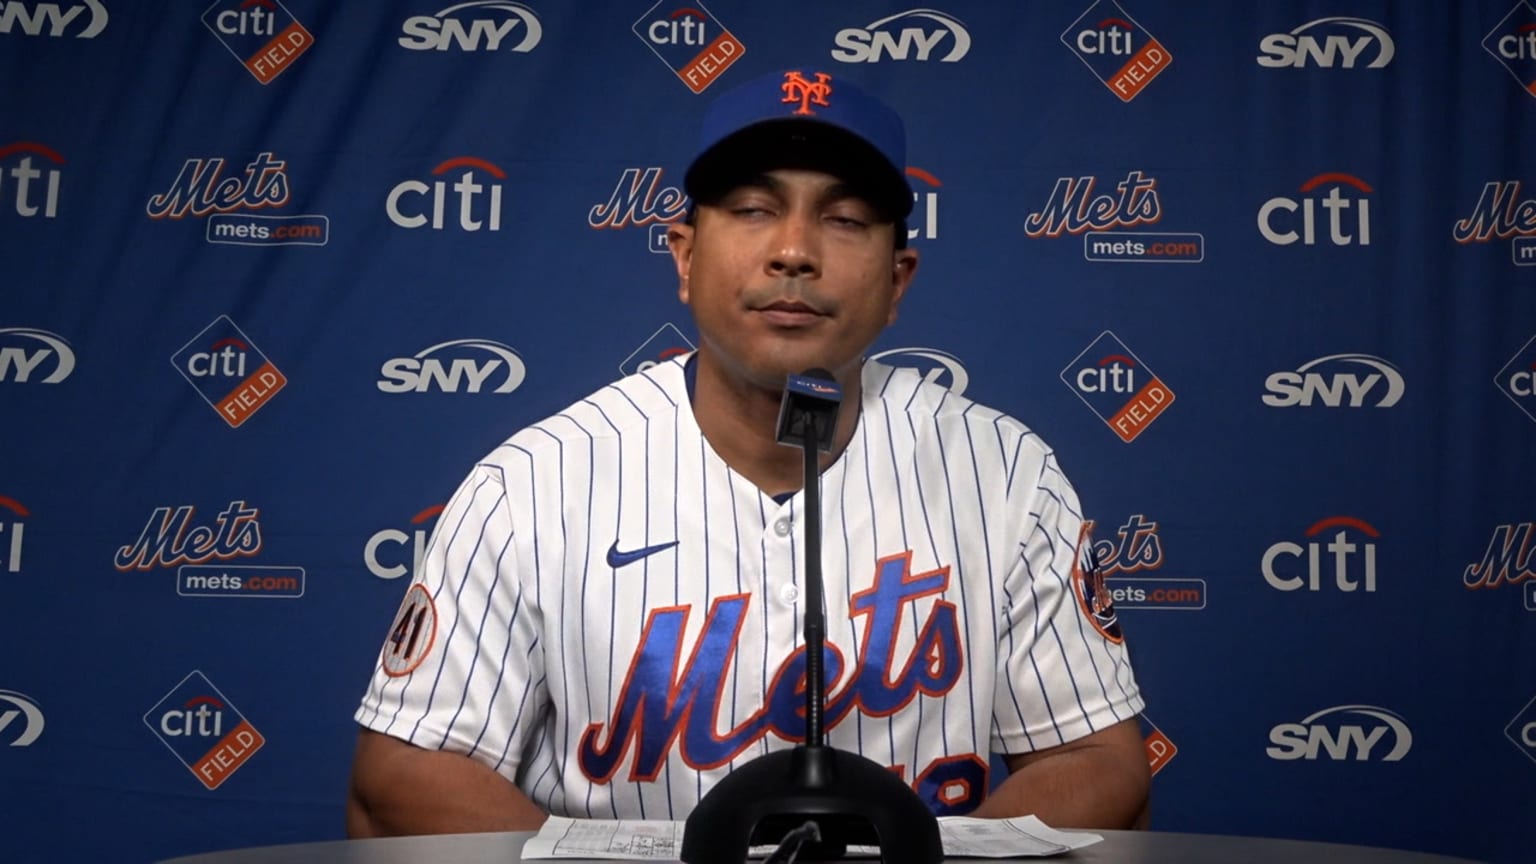 Luis Rojas' temperament is exactly what these Mets need